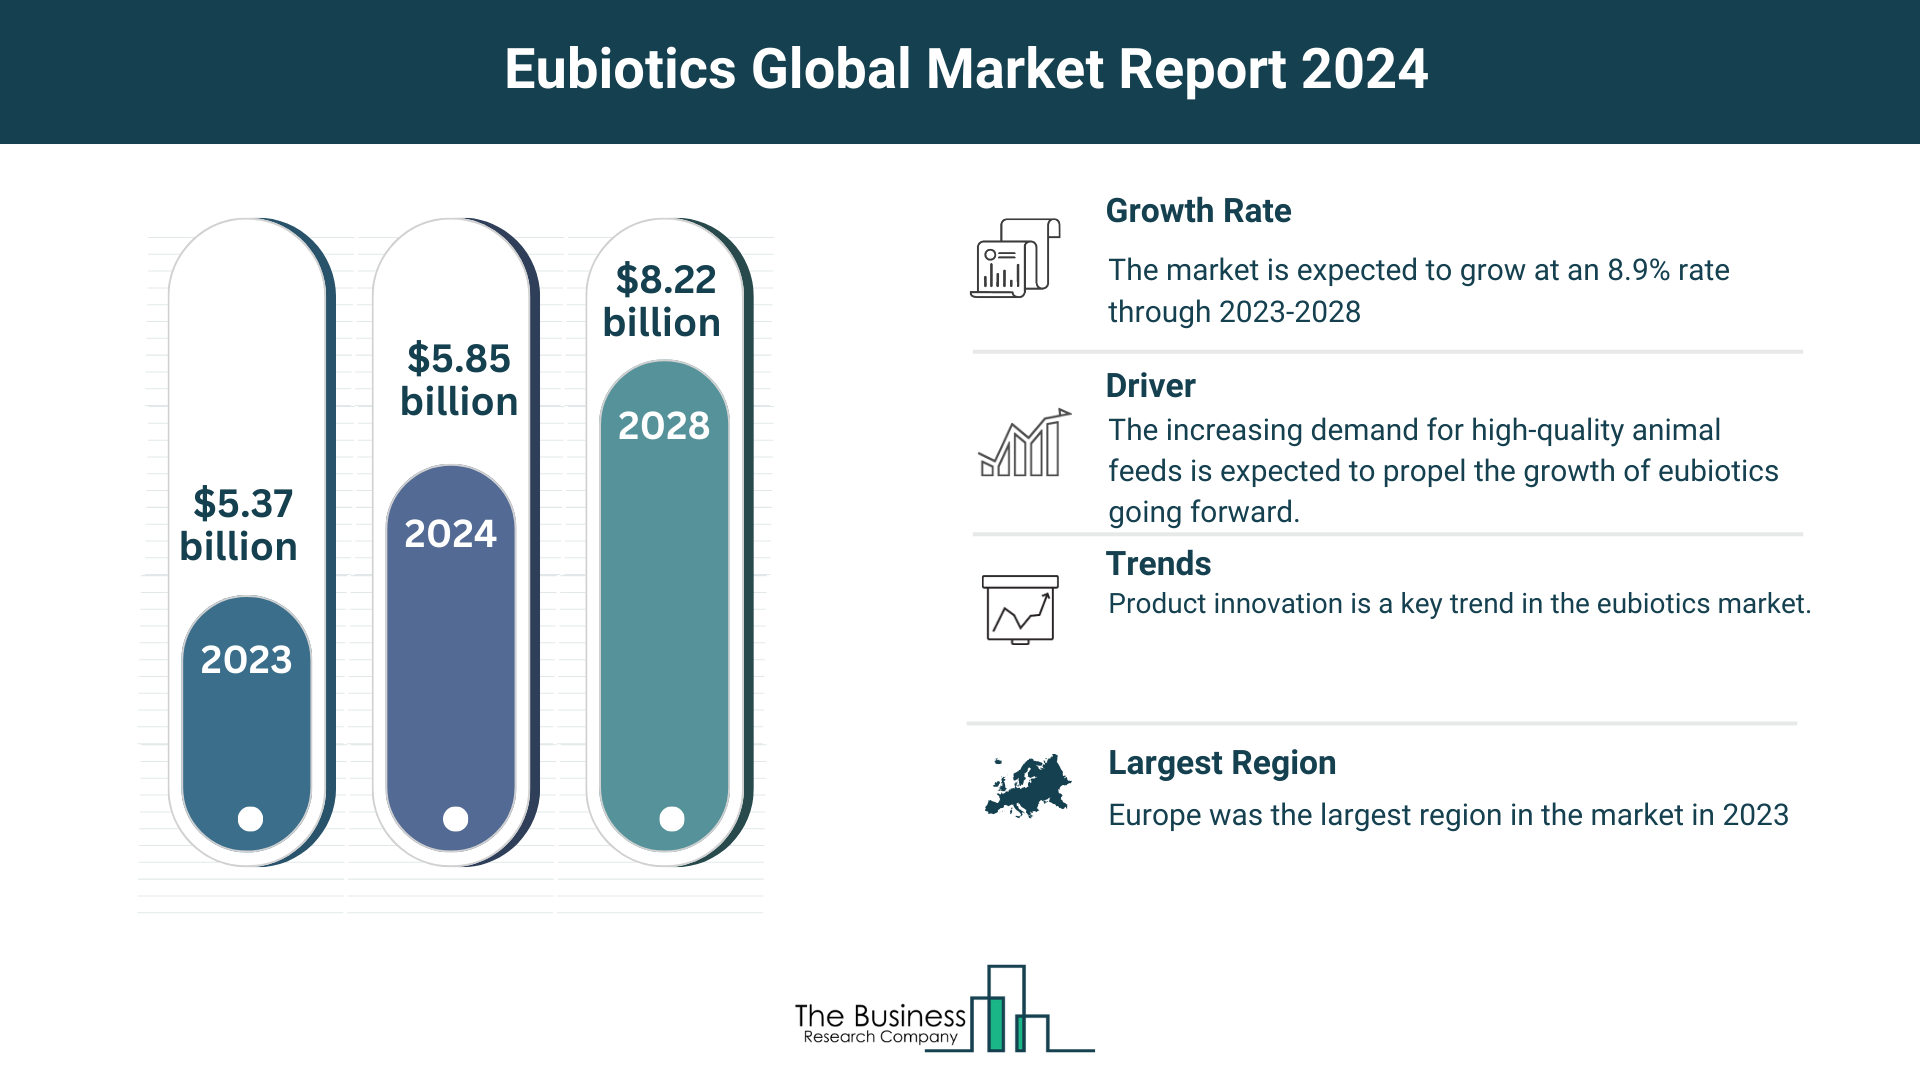 Global Eubiotics Market Overview 2024: Size, Drivers, And Trends